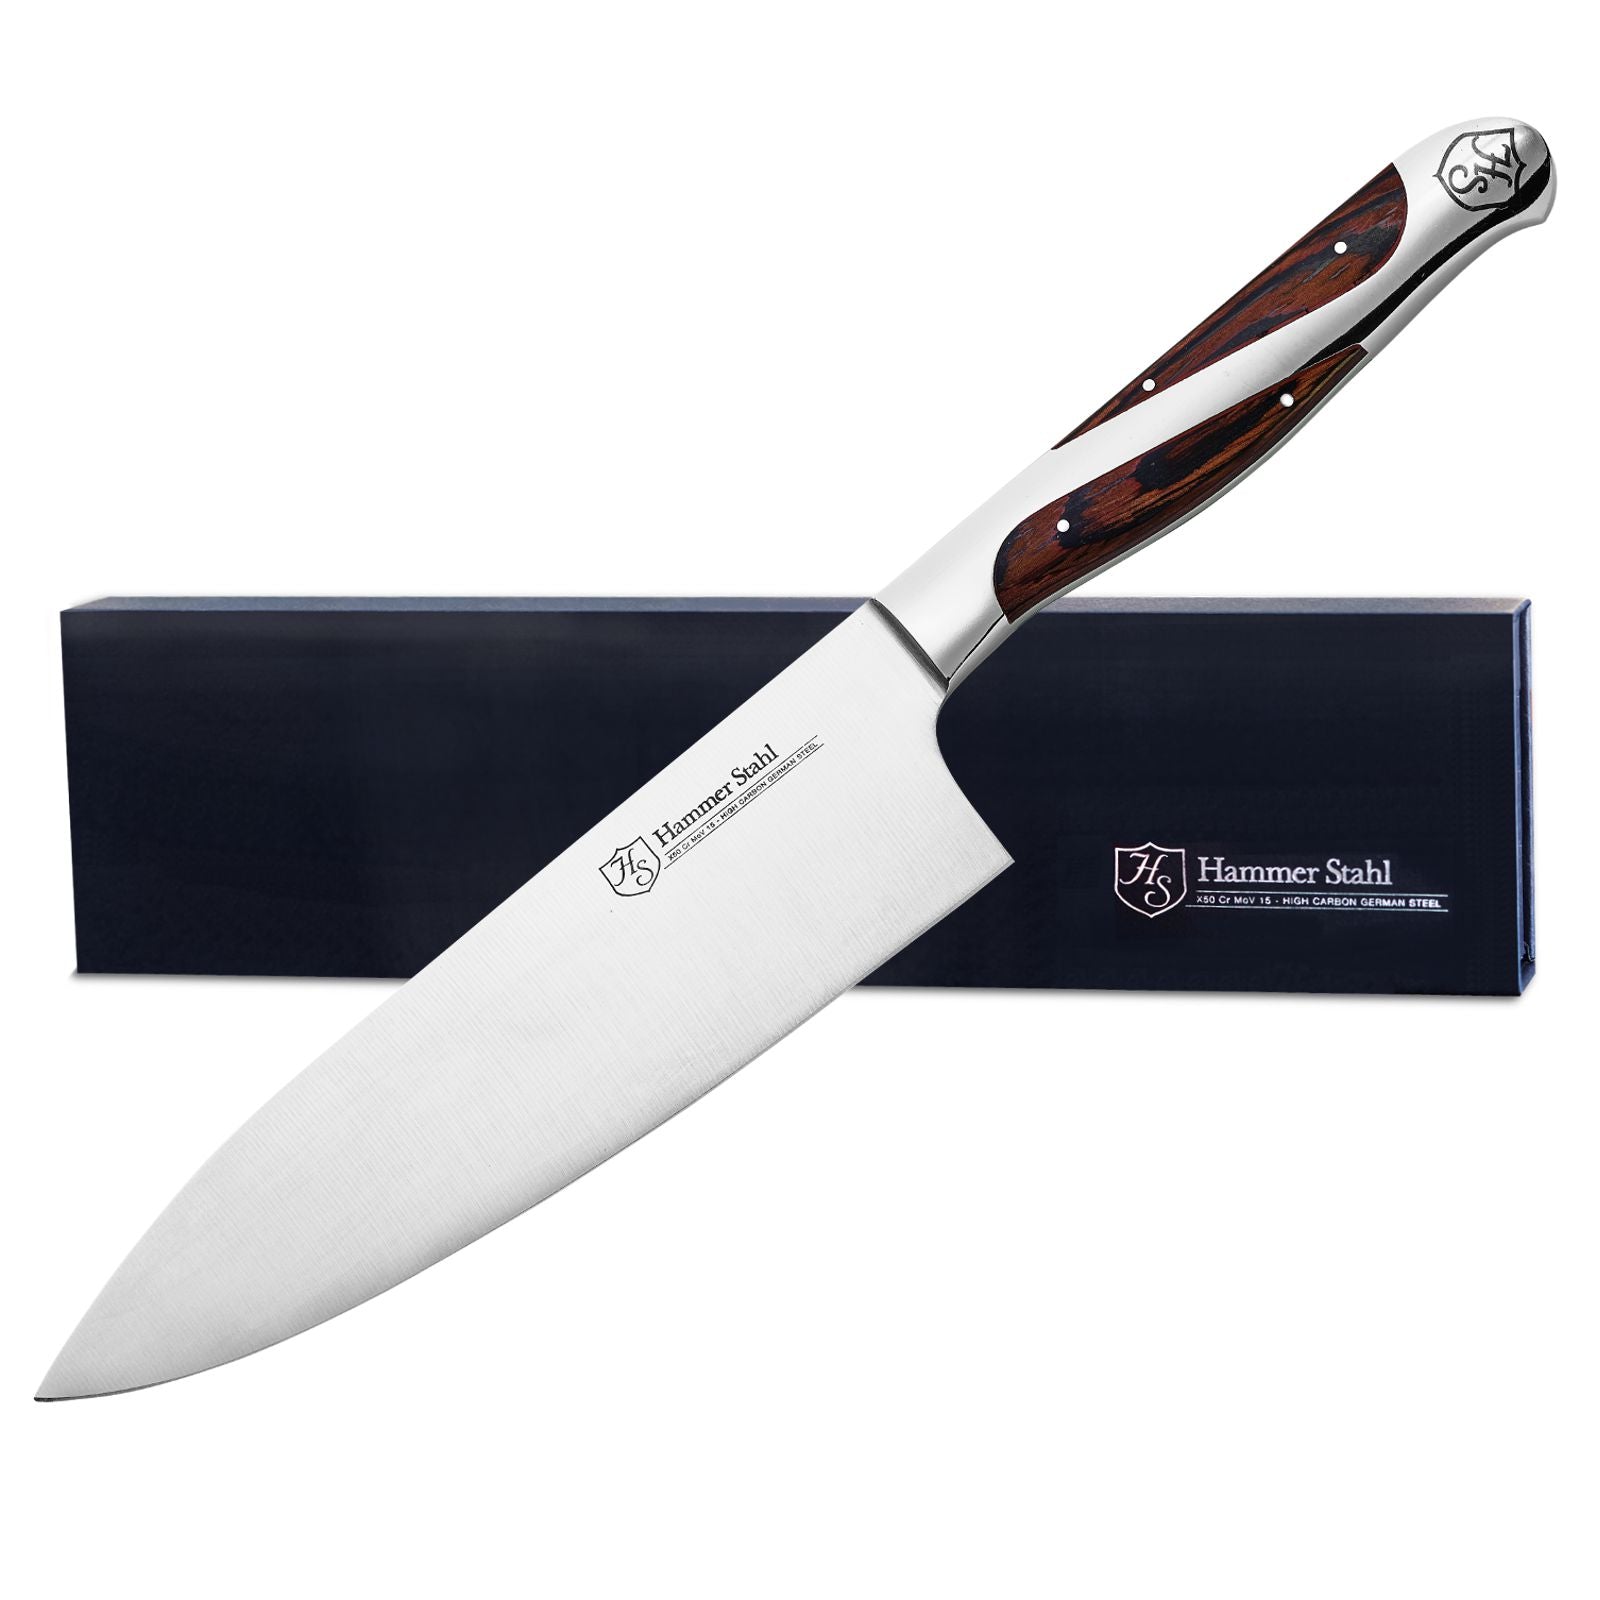 Chef knife carbon steel XC75 8.7 inches blade with leather sheath – Cuisine  Romefort